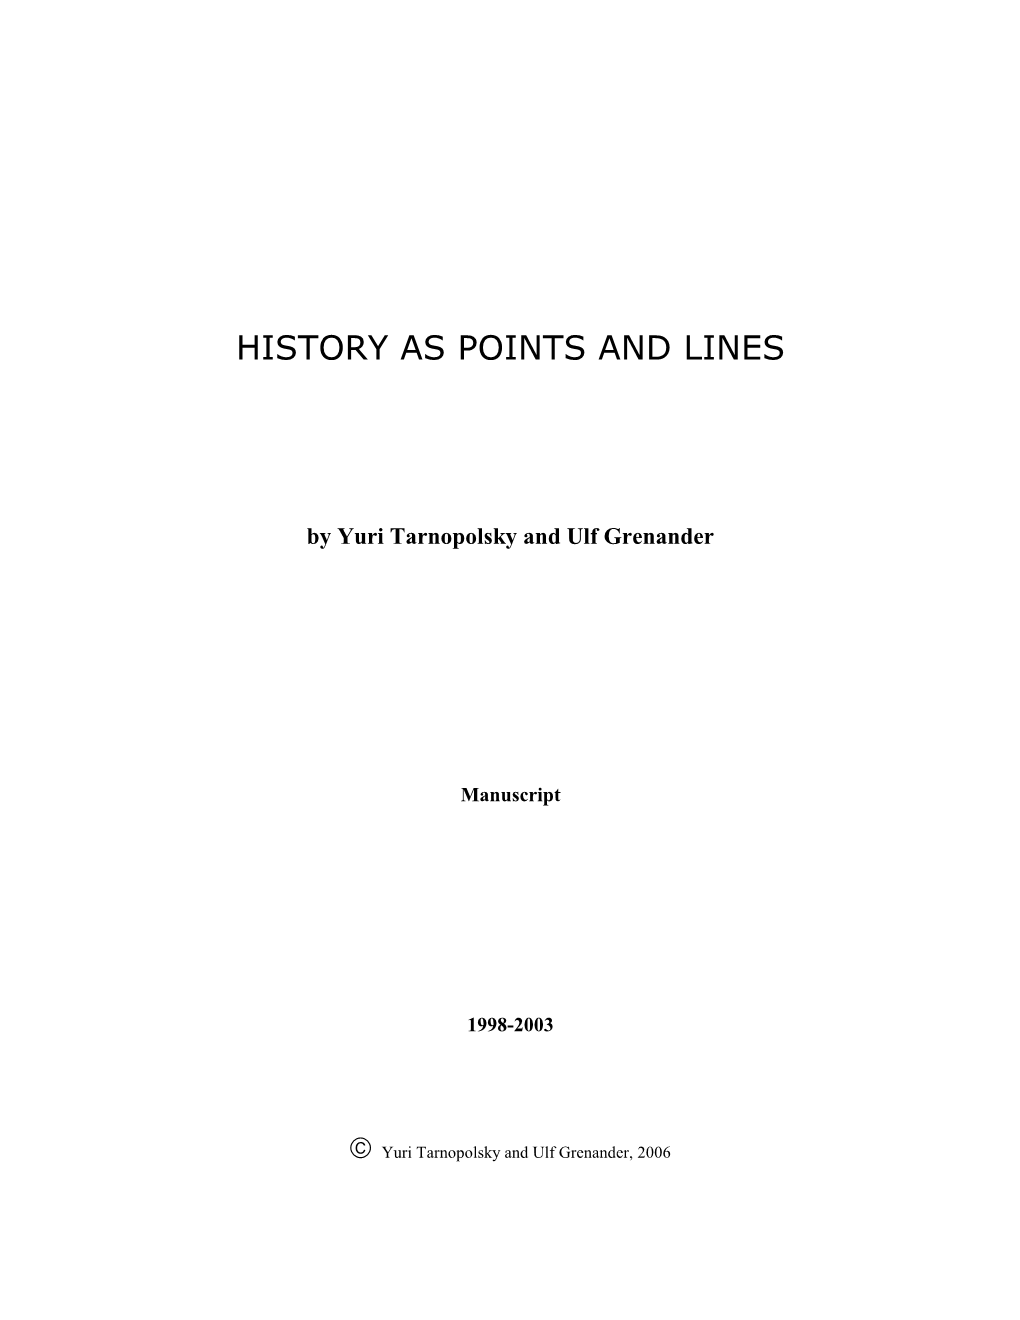 History As Points and Lines